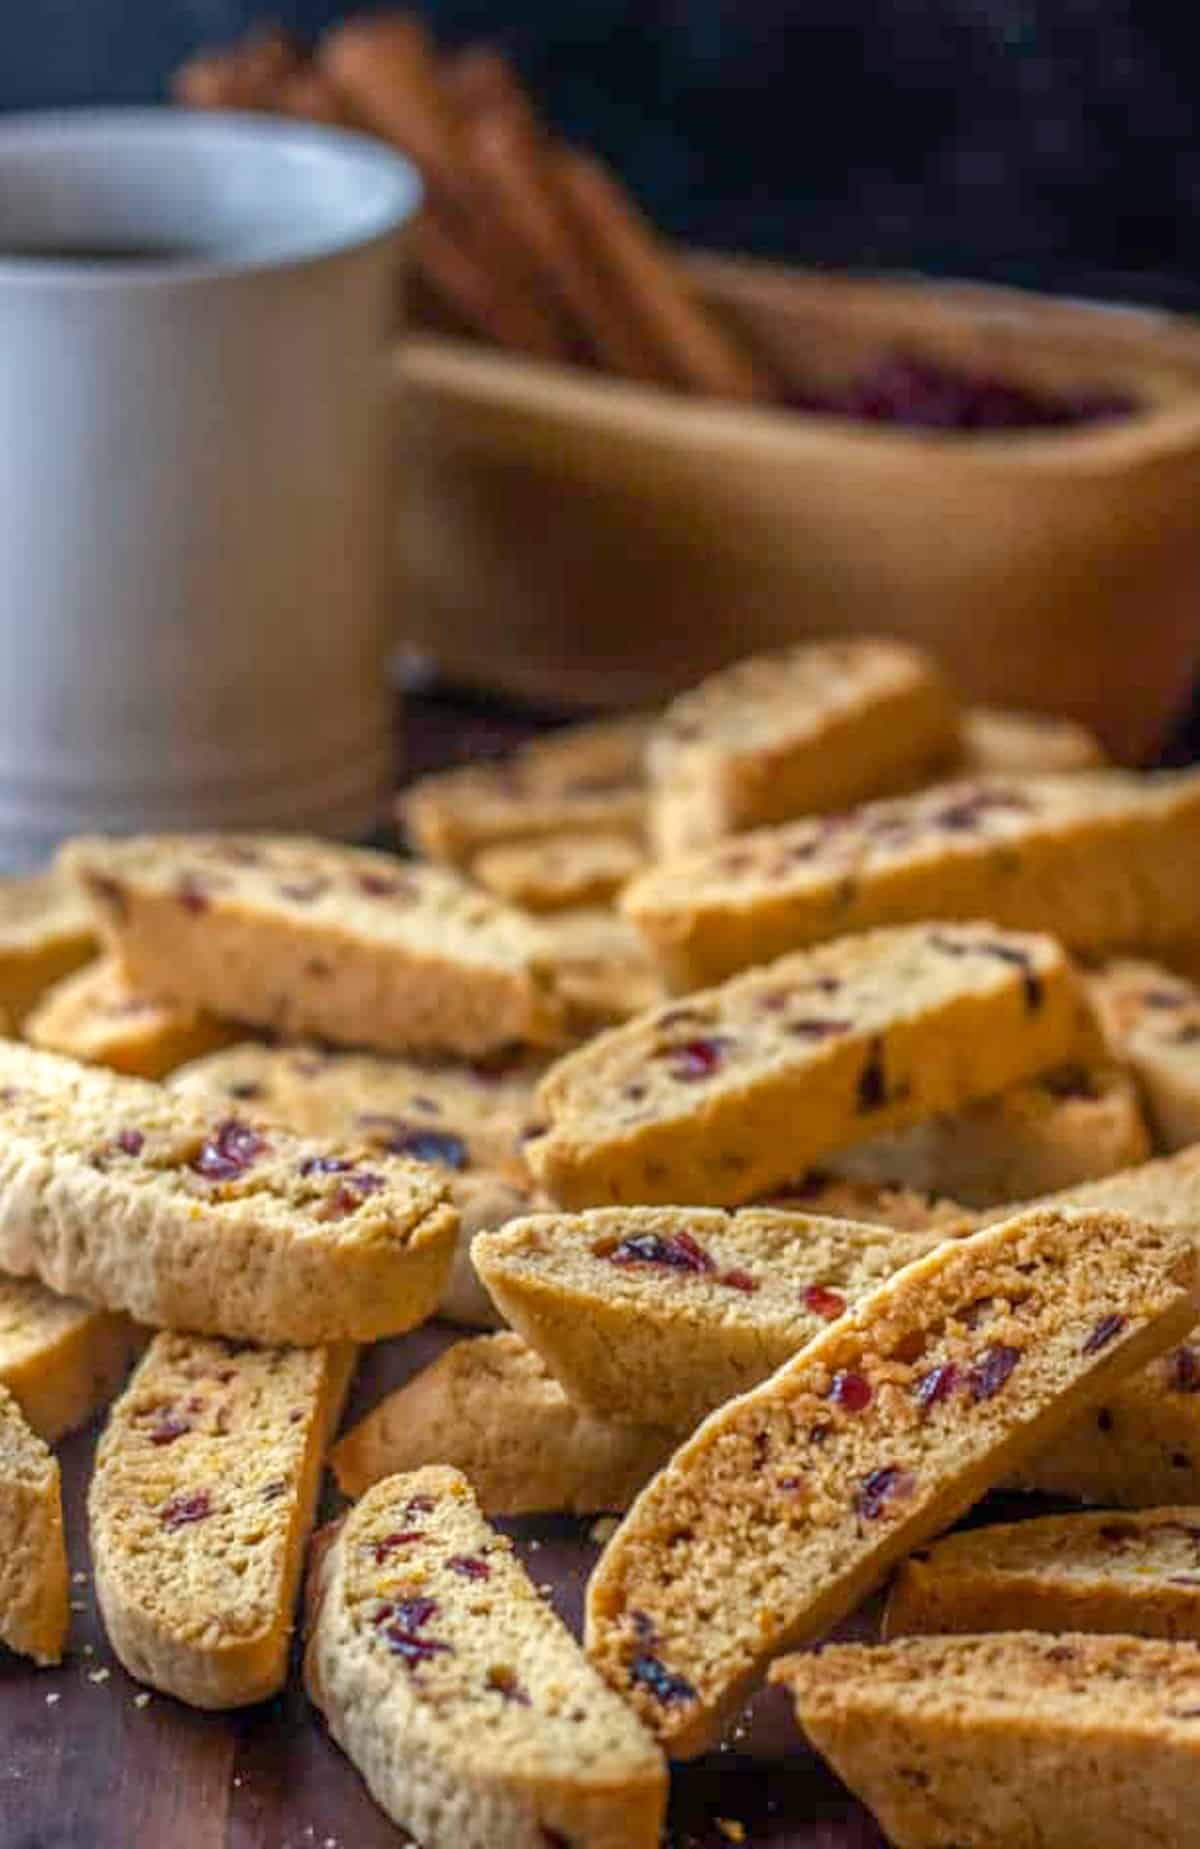 Cranberry orange biscotti piled up in front of a cup of coffee and container of cinnamon sticks.